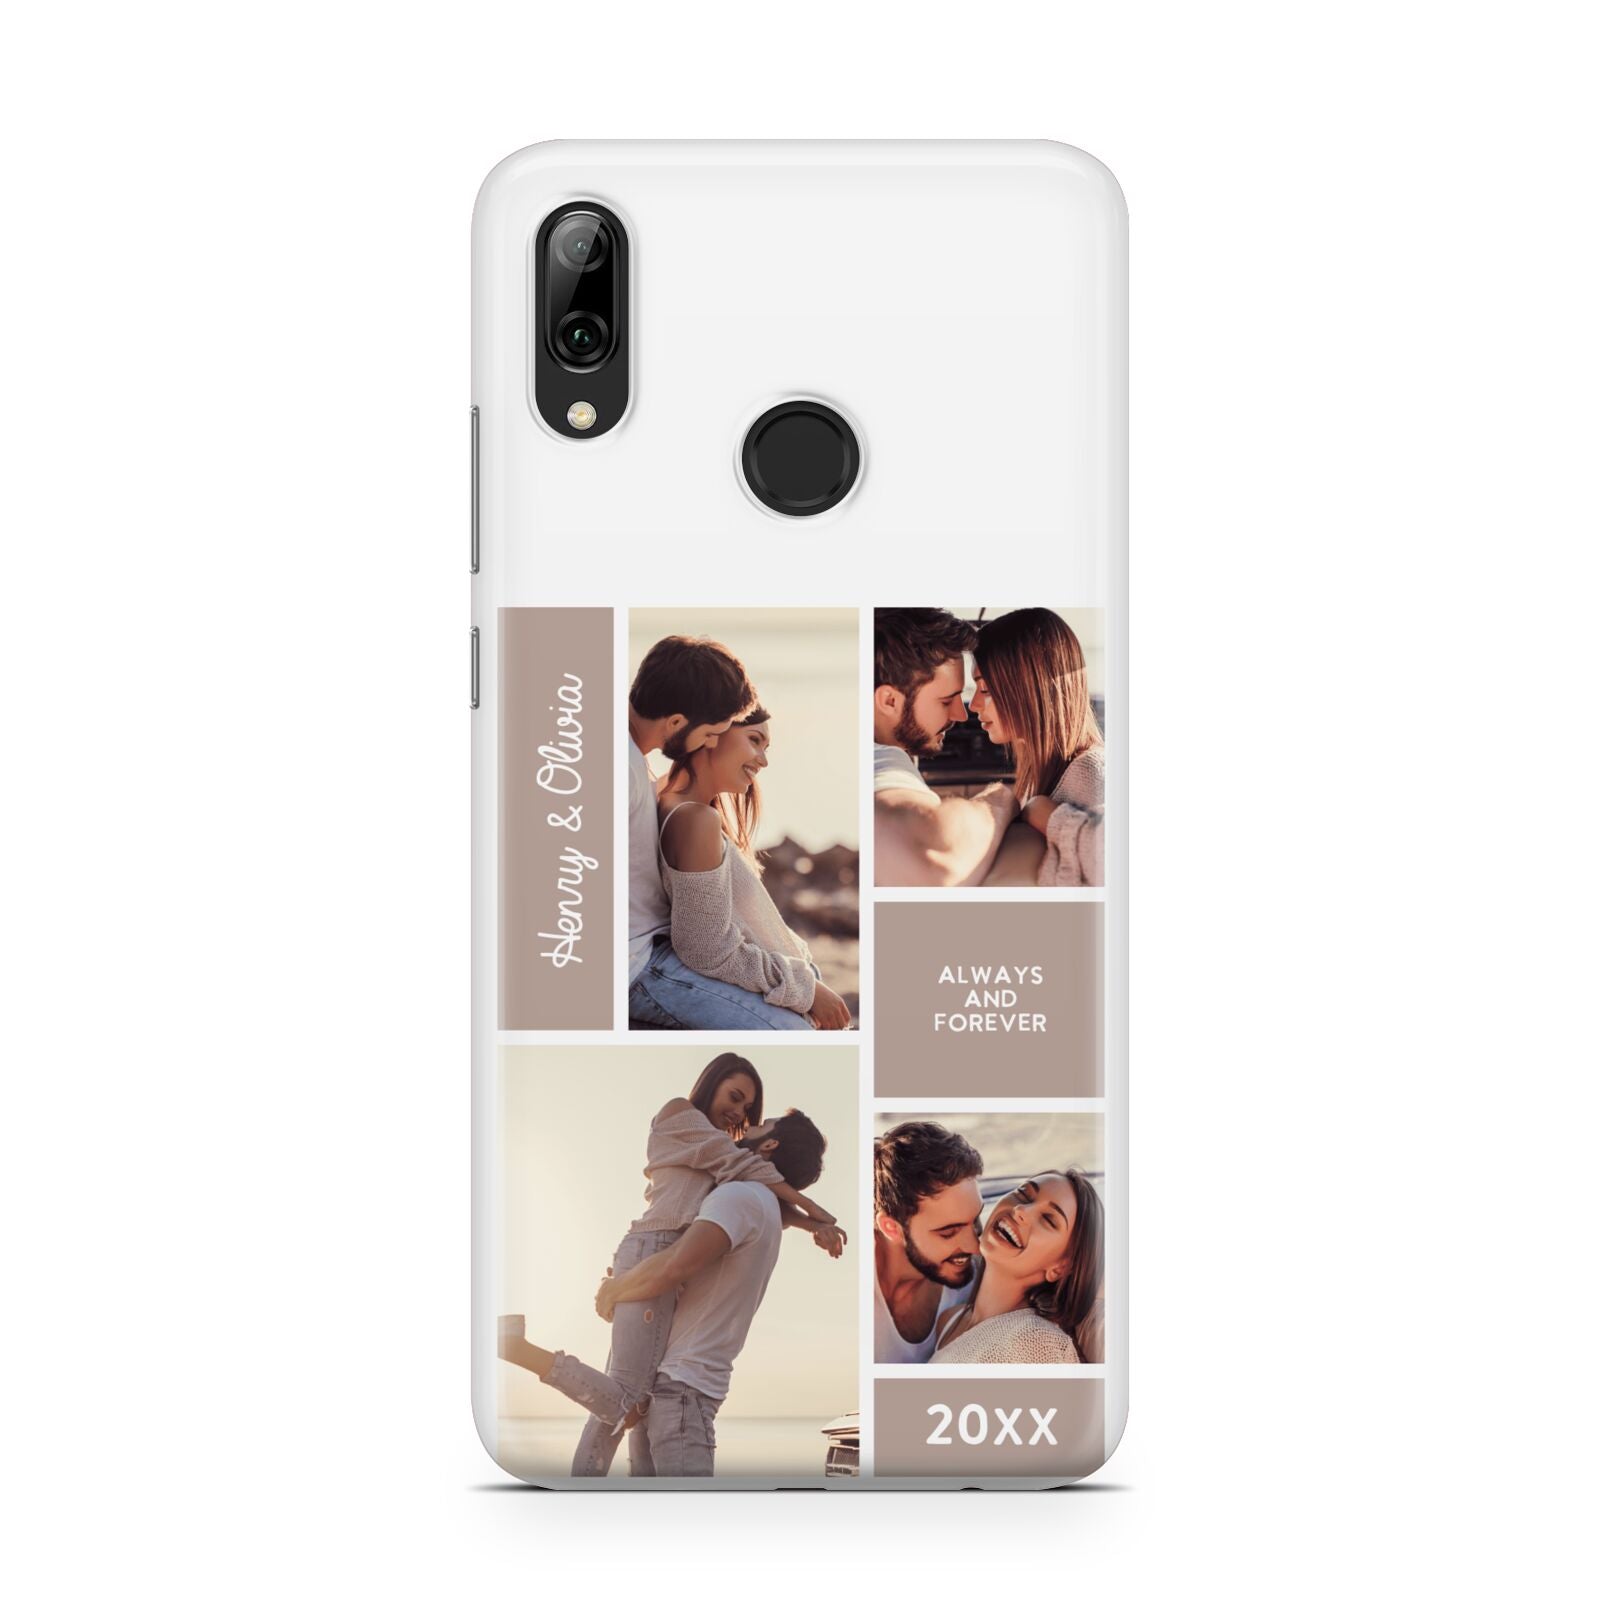 Couples Valentine Photo Collage Personalised Huawei Y7 2019